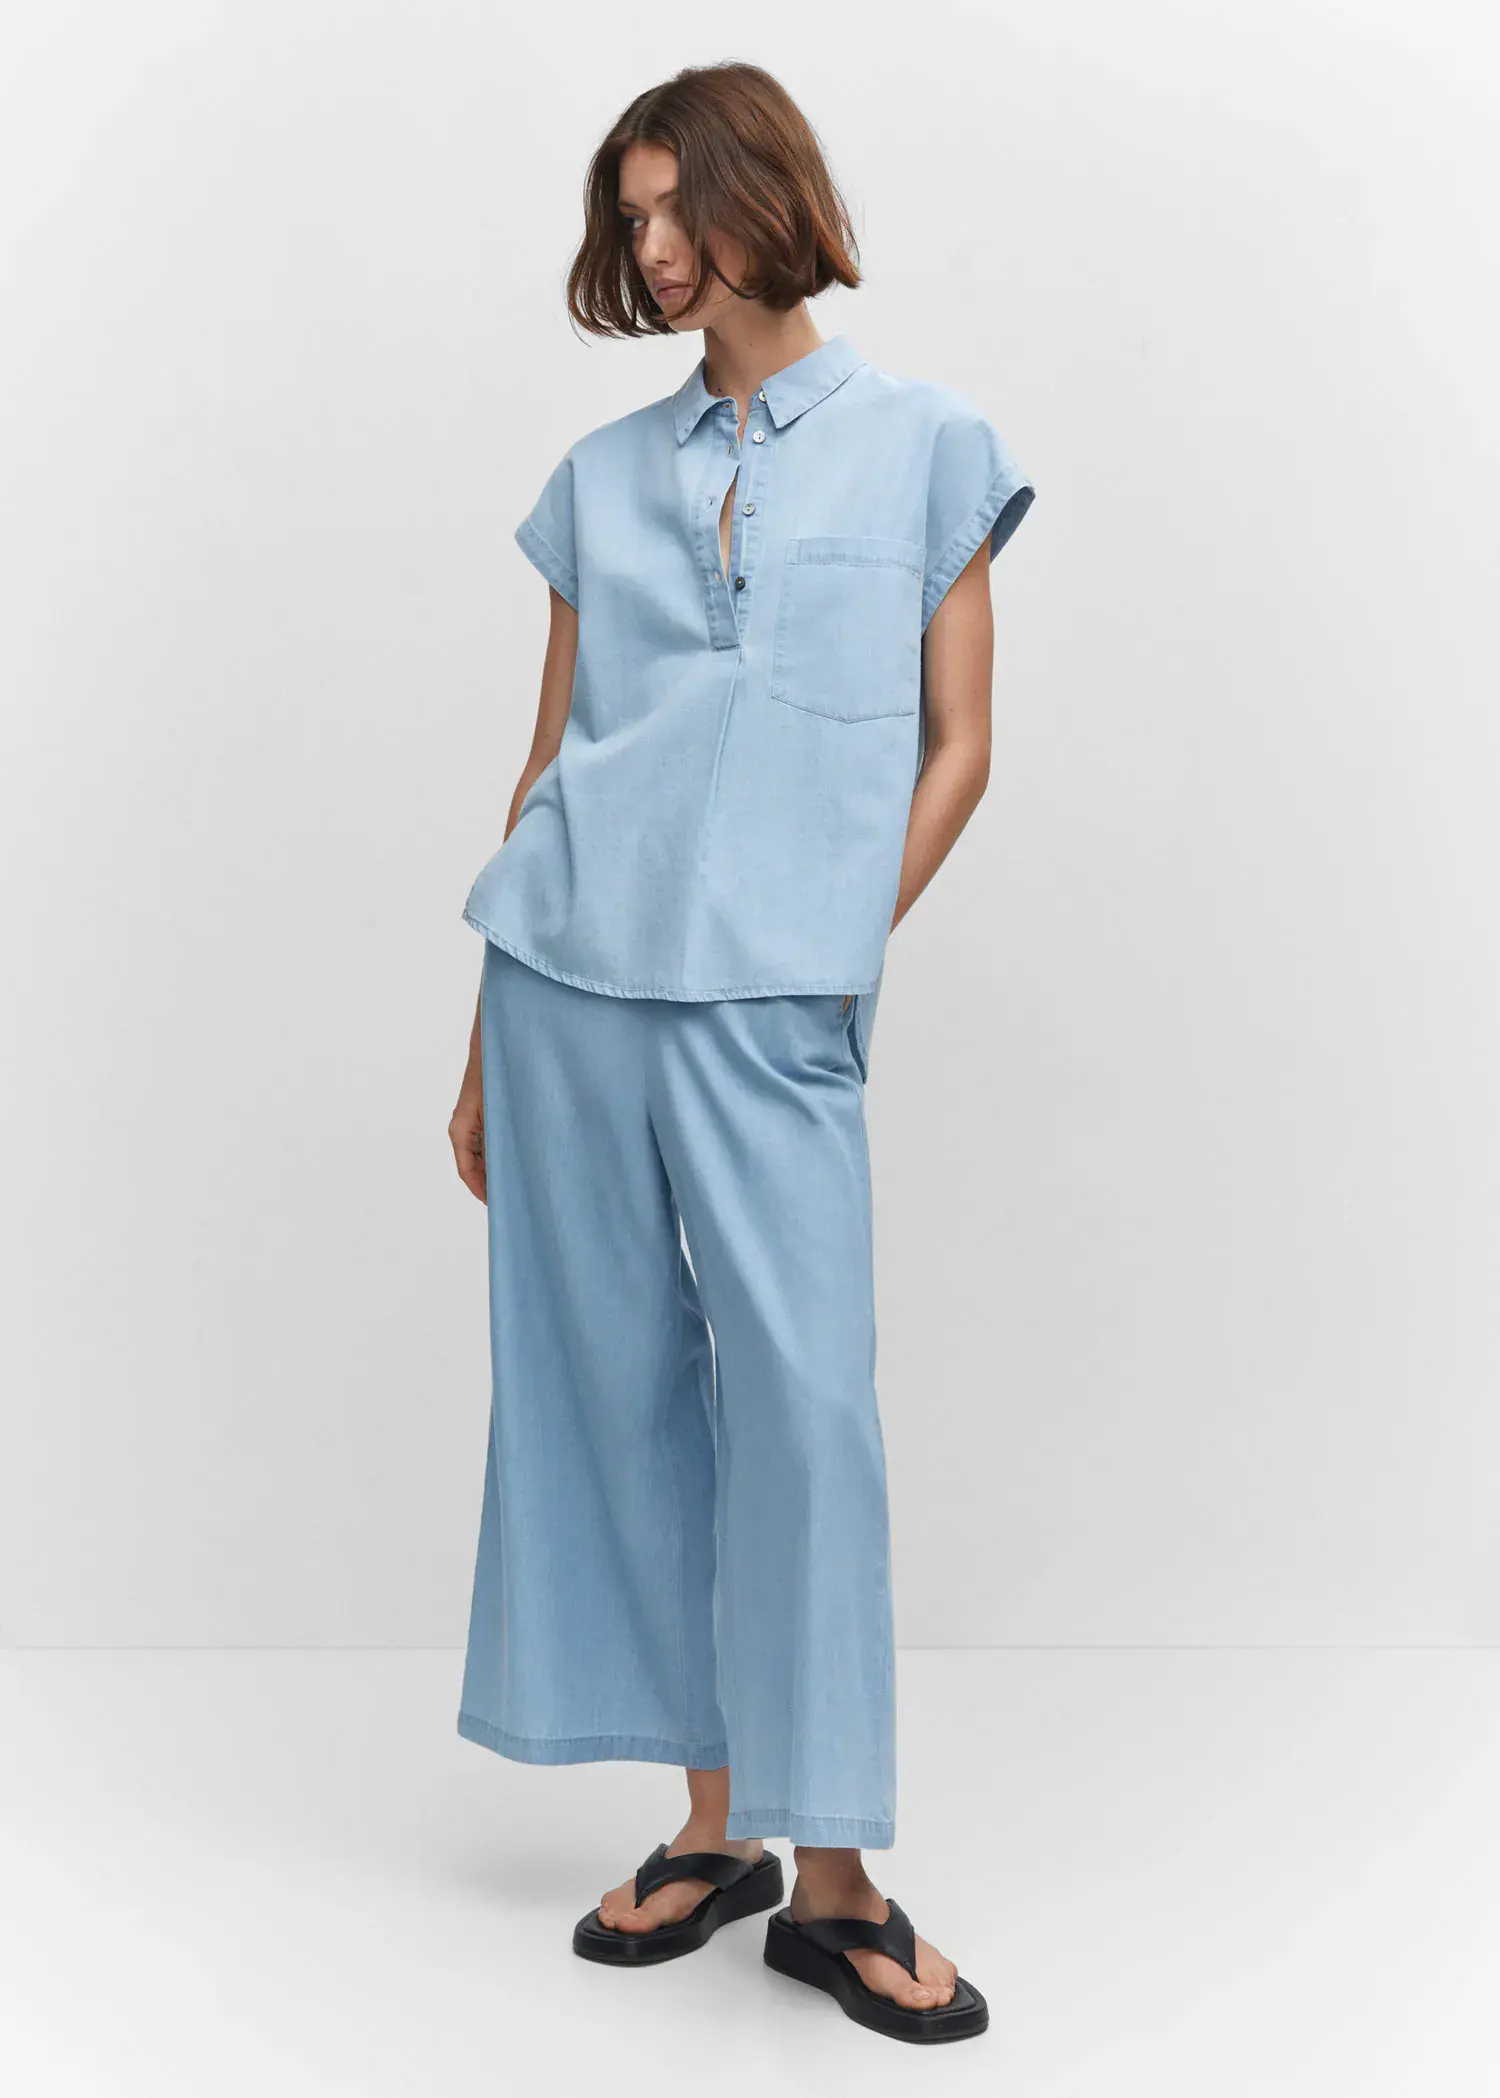 Mango 100% cotton culotte trousers . a person standing in a room wearing a blue outfit. 